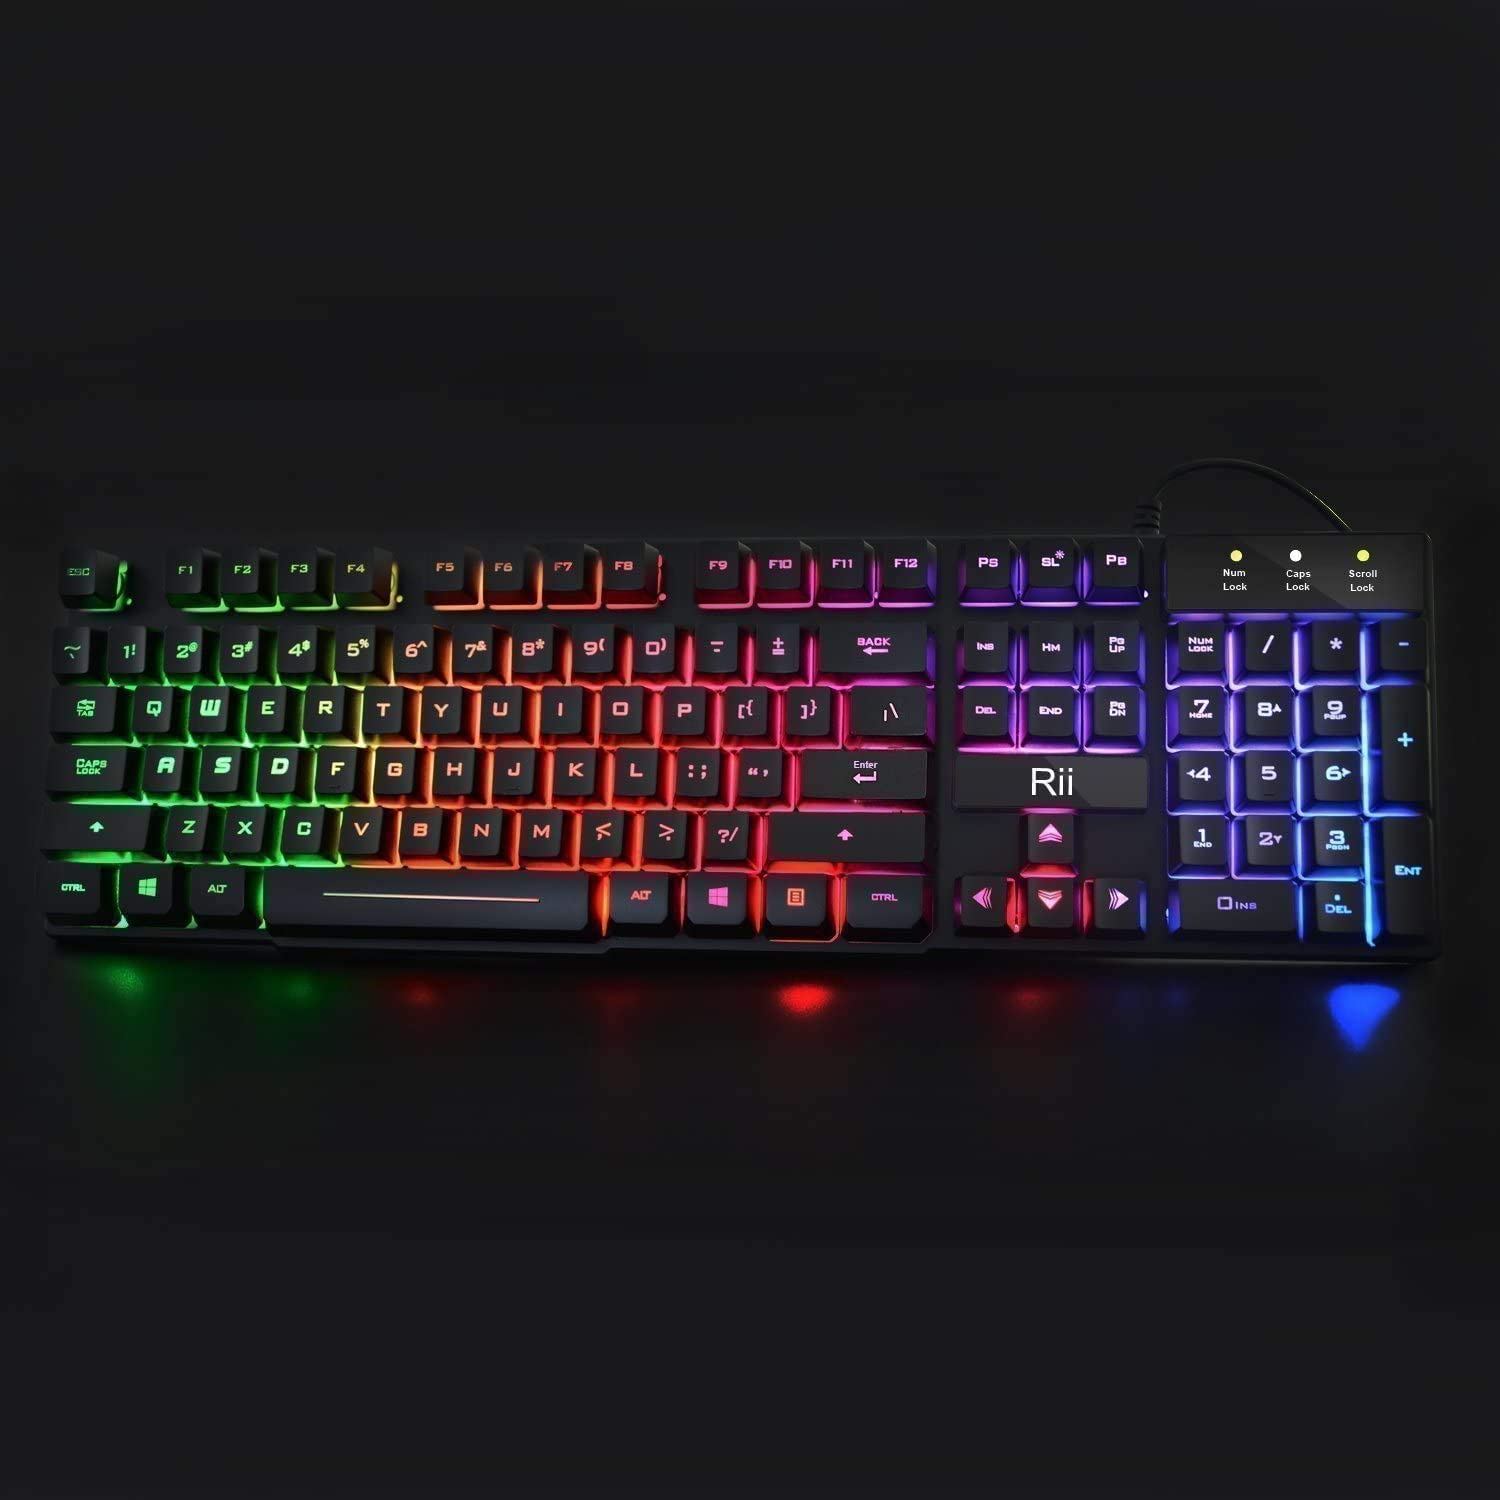 Rii RK100+ Multiple Color Rainbow LED Backlit Large Size USB Wired Mechanical Feeling Multimedia PC Gaming Keyboard,Office Keyboard for Working or Primer Gaming,Office Device (US Layout) - image 2 of 7